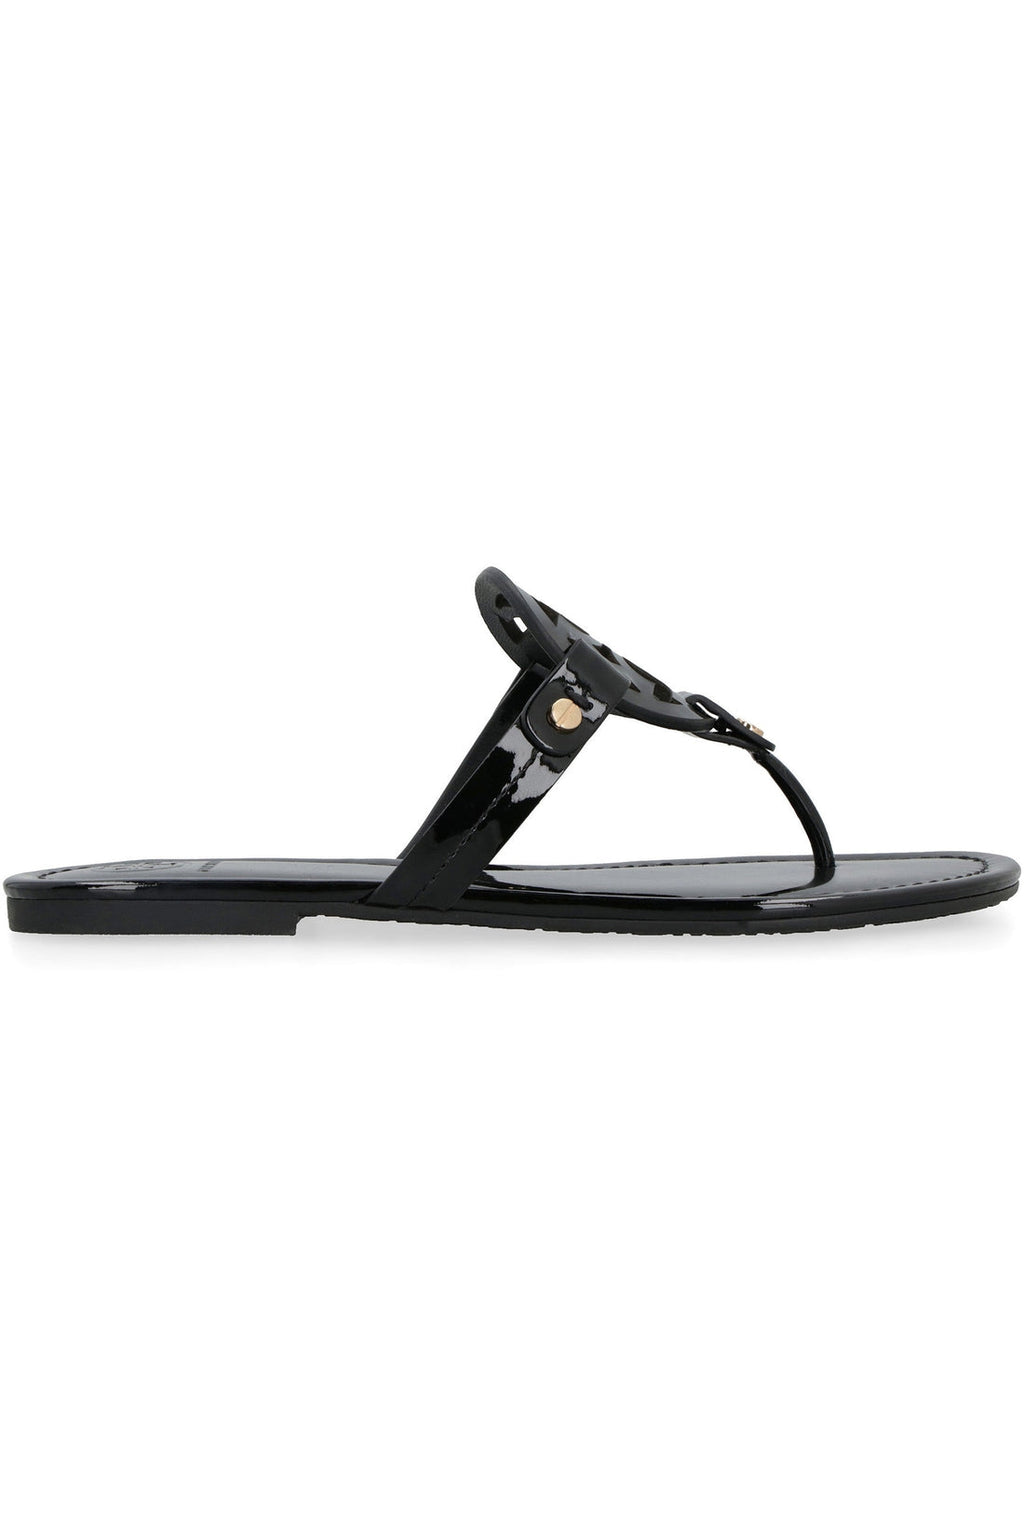 Tory Burch-OUTLET-SALE-Miller patent leather thong-sandals-ARCHIVIST